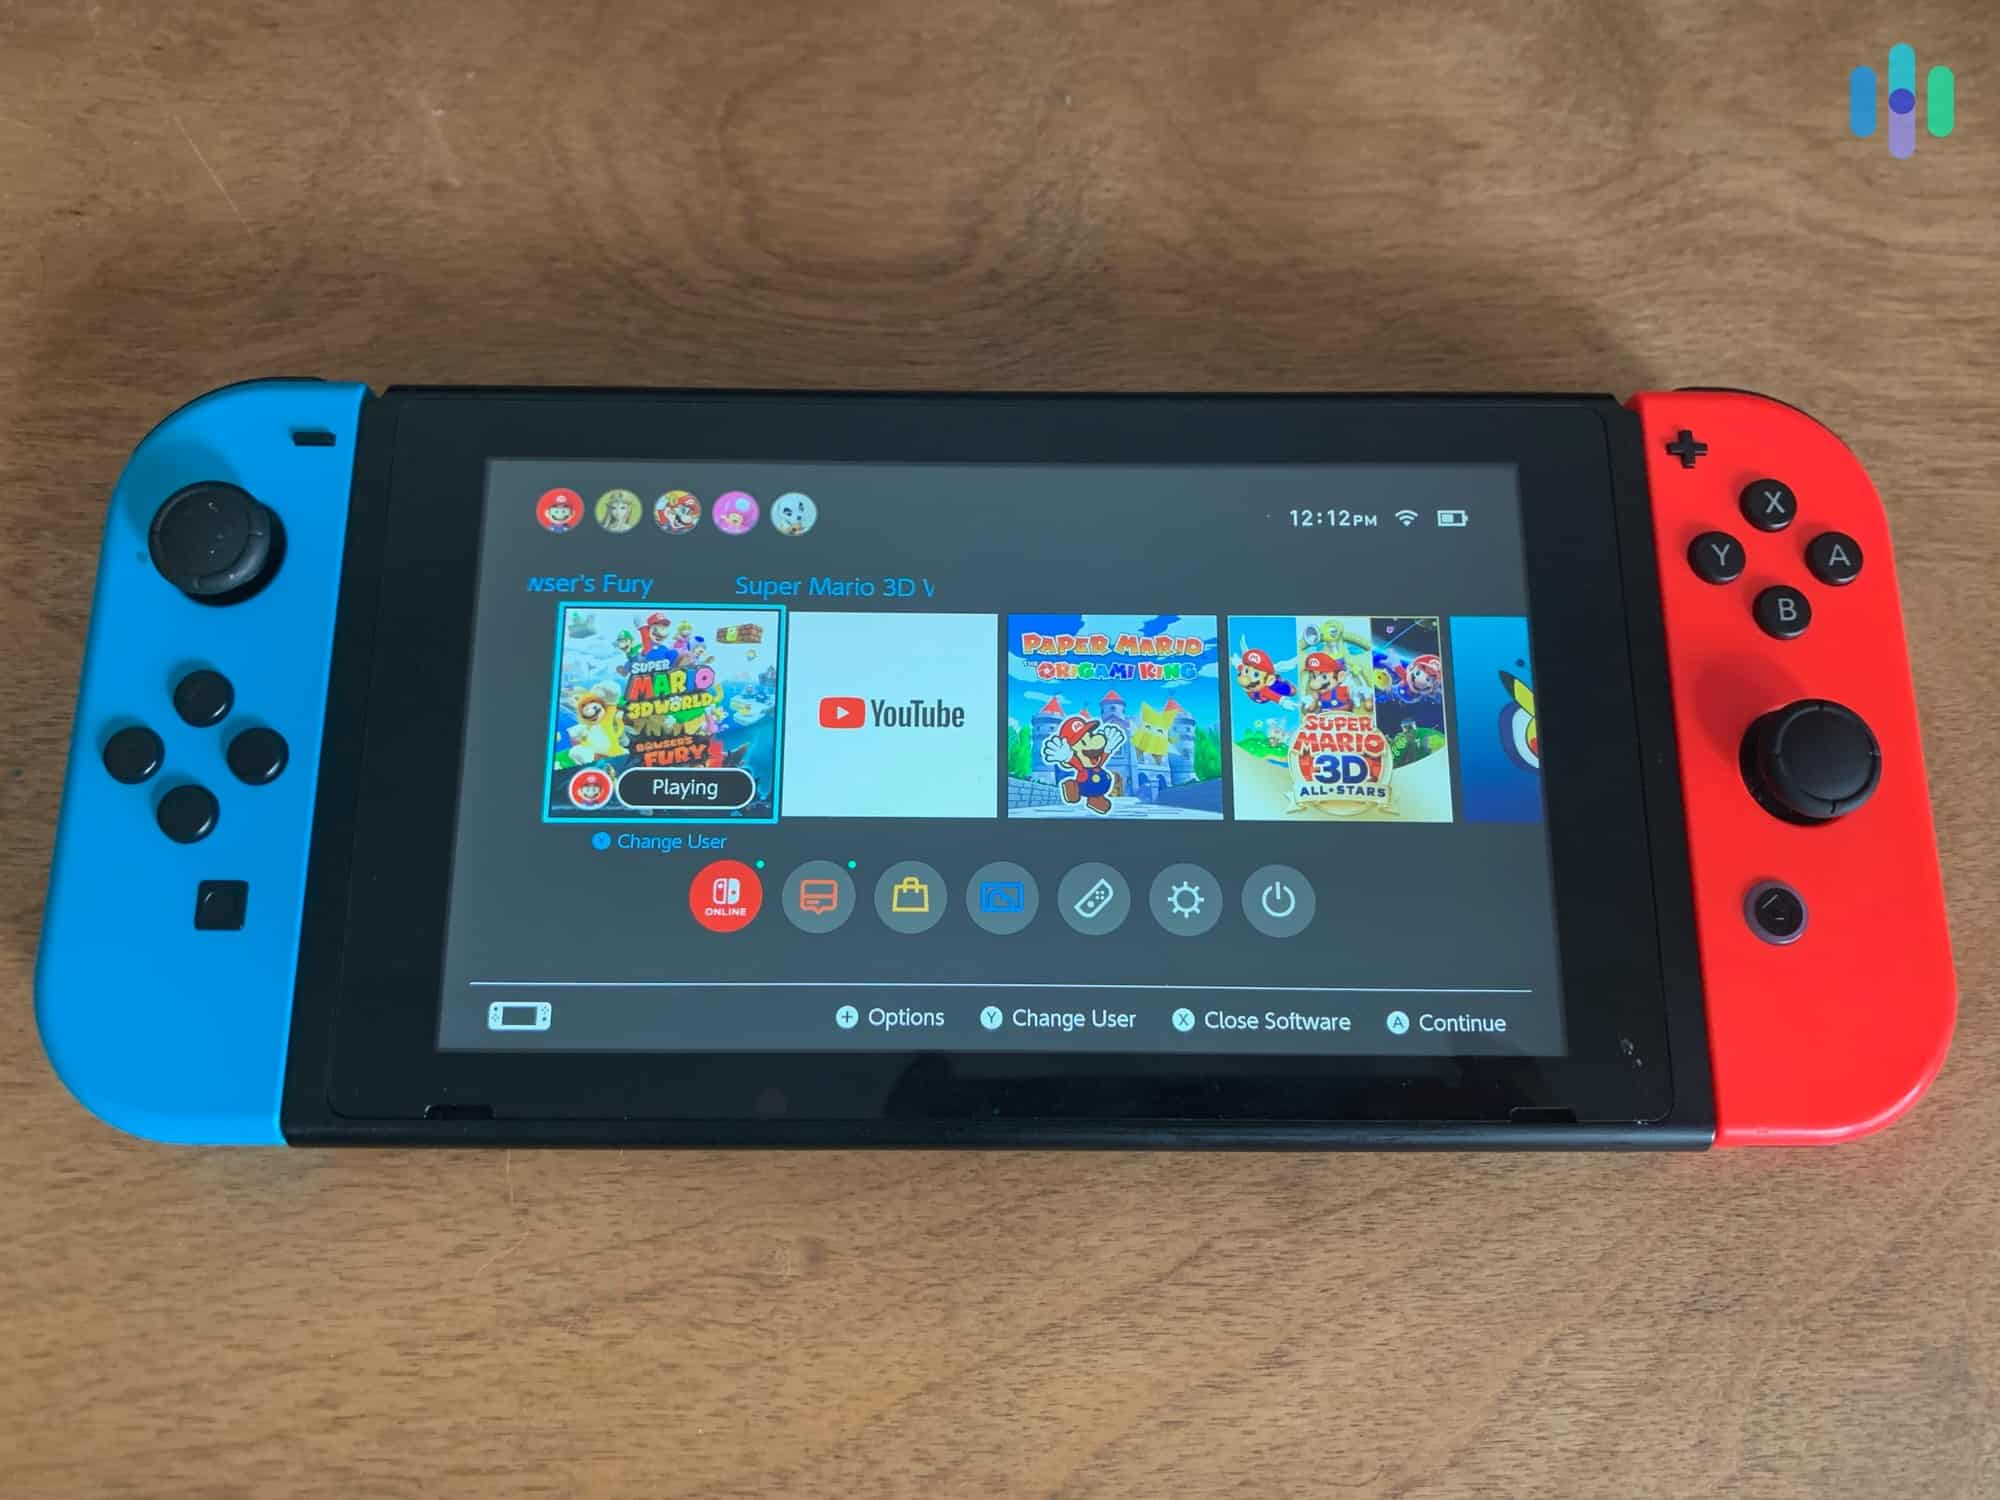 How To Customize Your Nintendo Switch So No One Else Knows You're Online